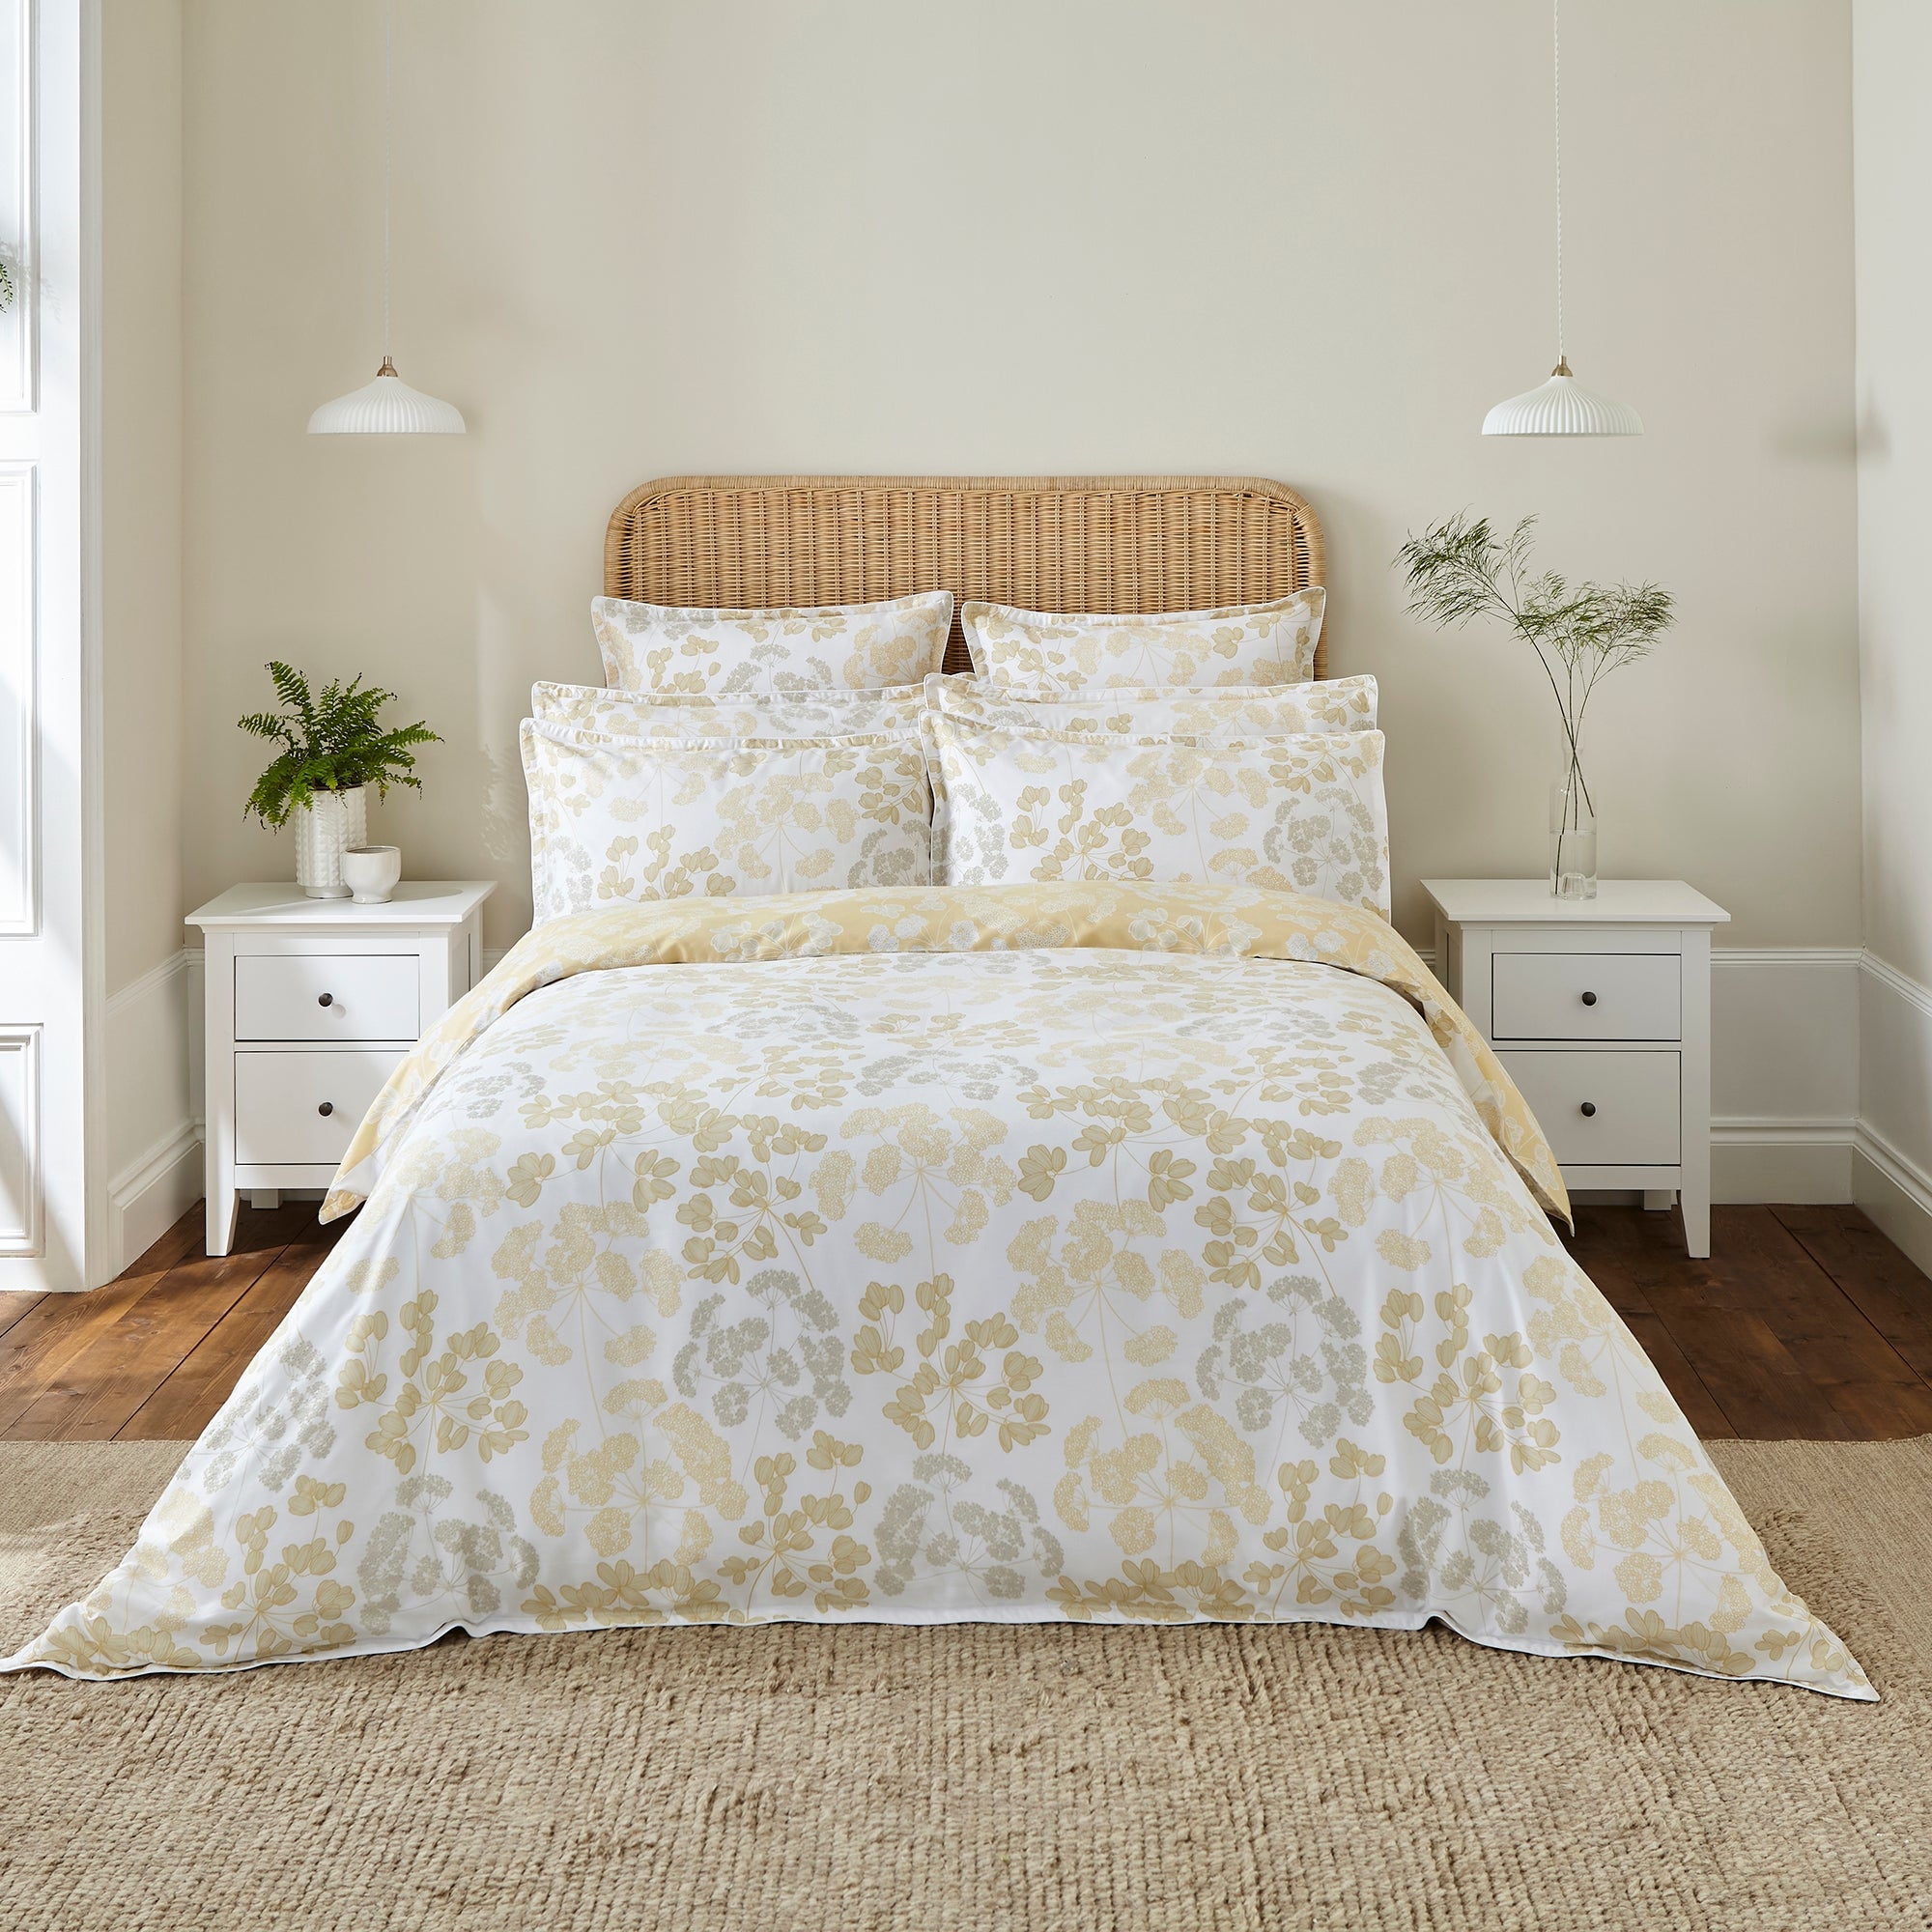 Dorma Daylesford 300 Thread Count Cotton Sateen Yellow Duvet Cover and Pillowcase Set Yellow